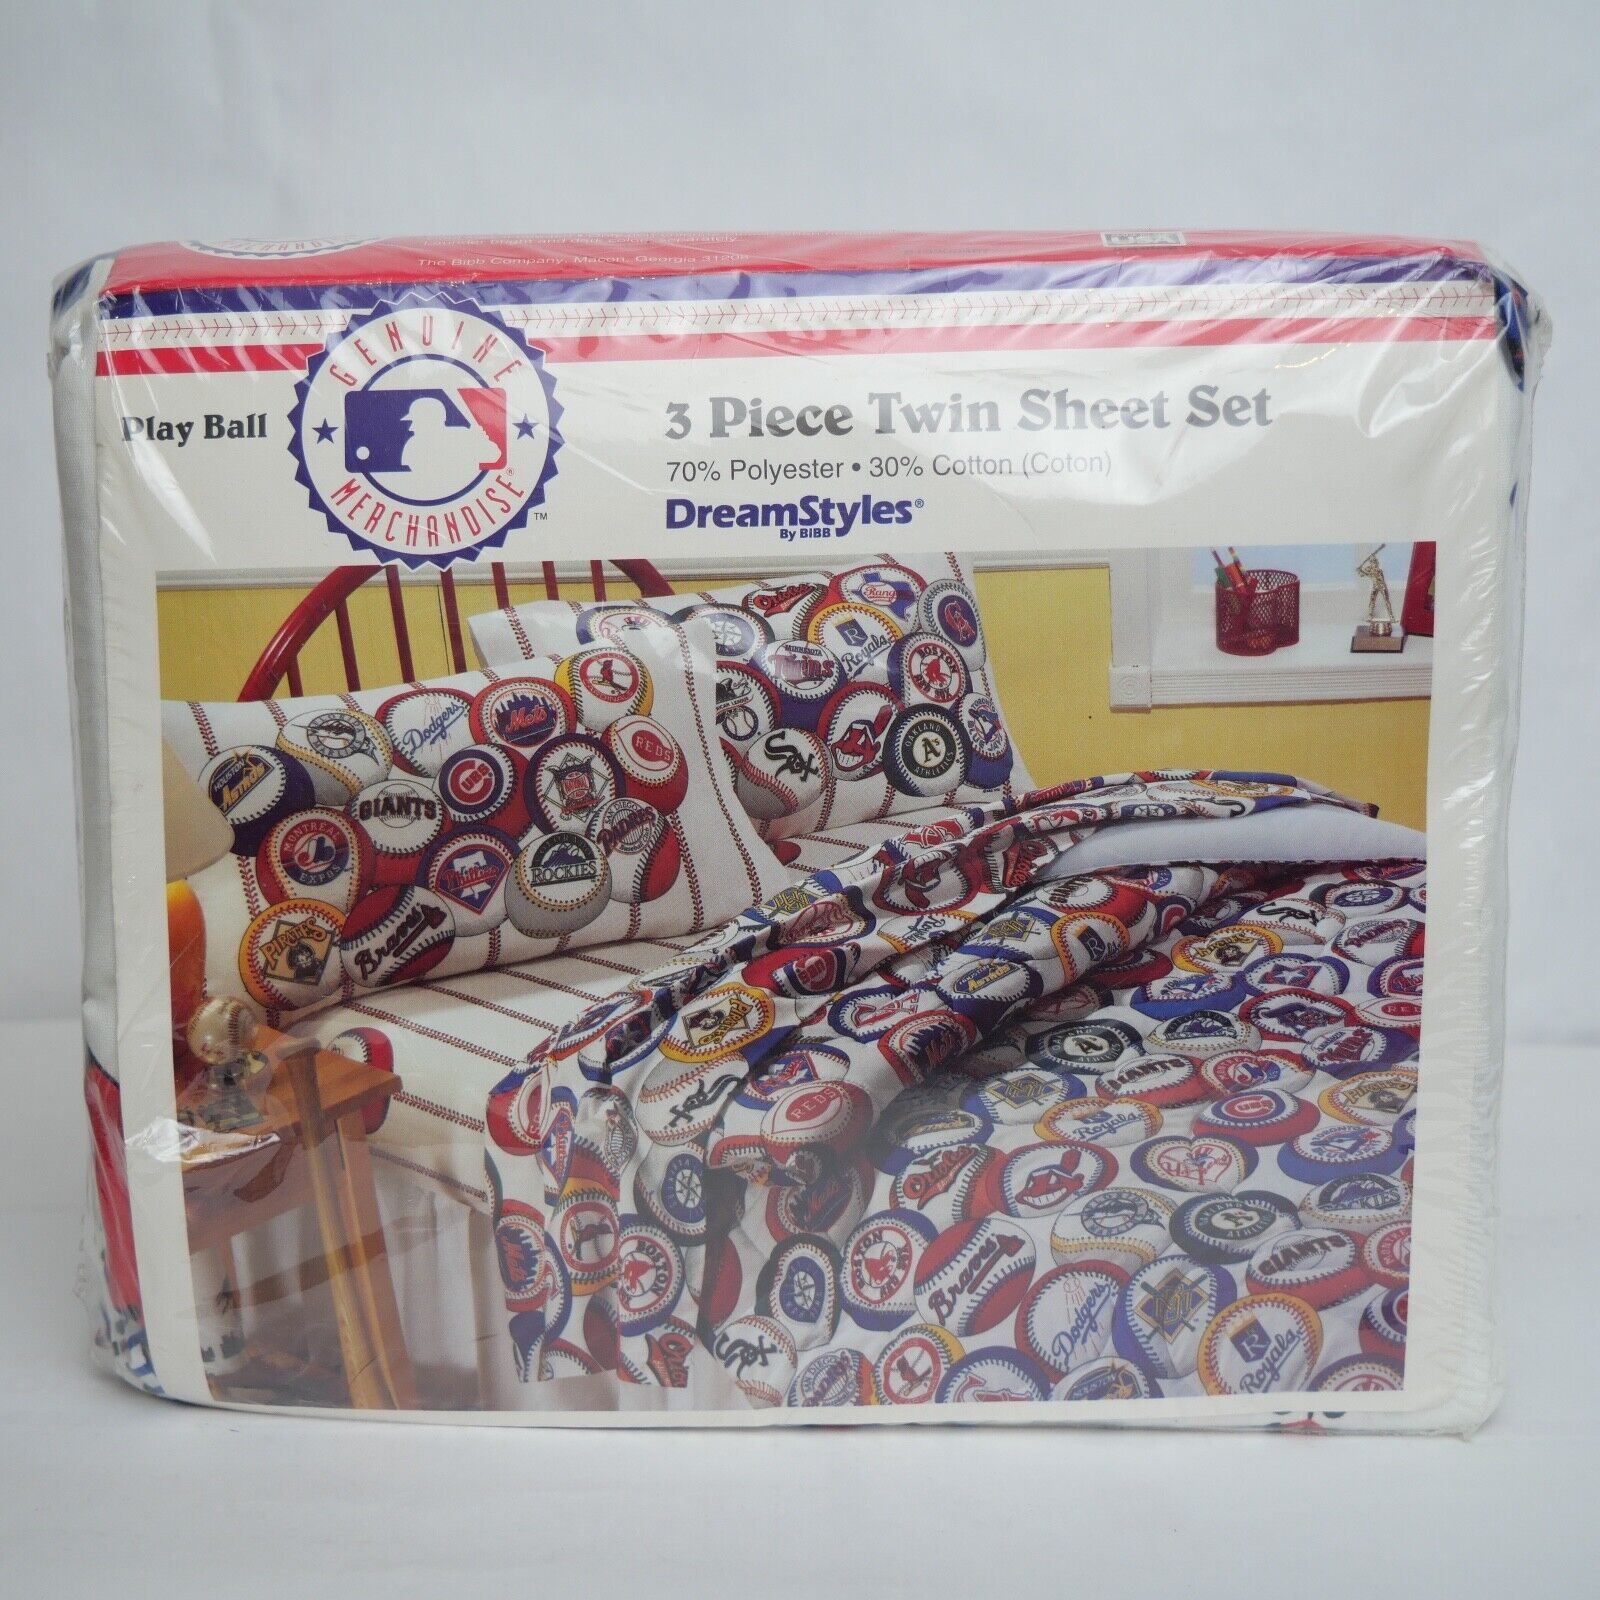 Vintage MLB Baseball 1980's 3 Piece Twin Sheet Bed Set Dream Styles Licensed